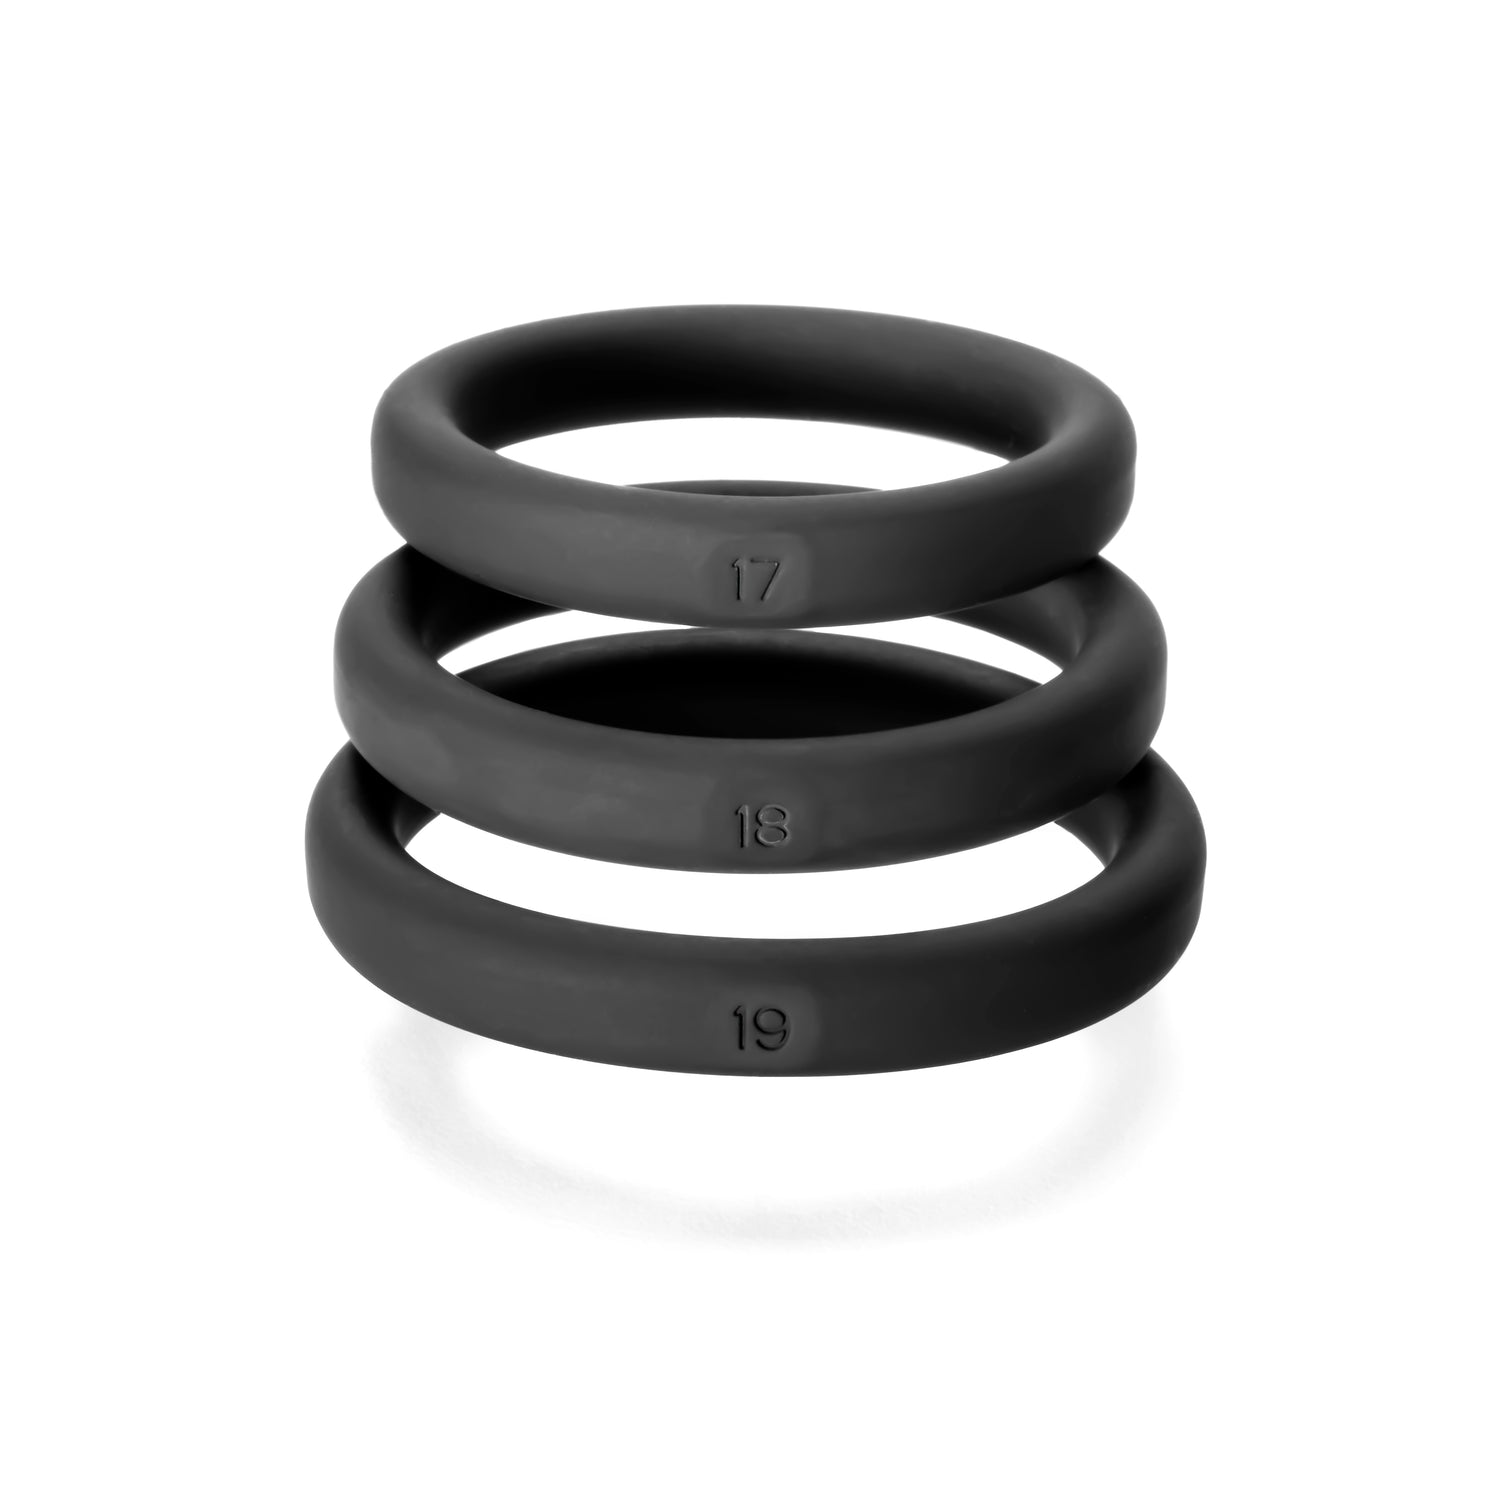 Xact-Fit Silicone Rings Large 3 Ring Kit - Just for you desires